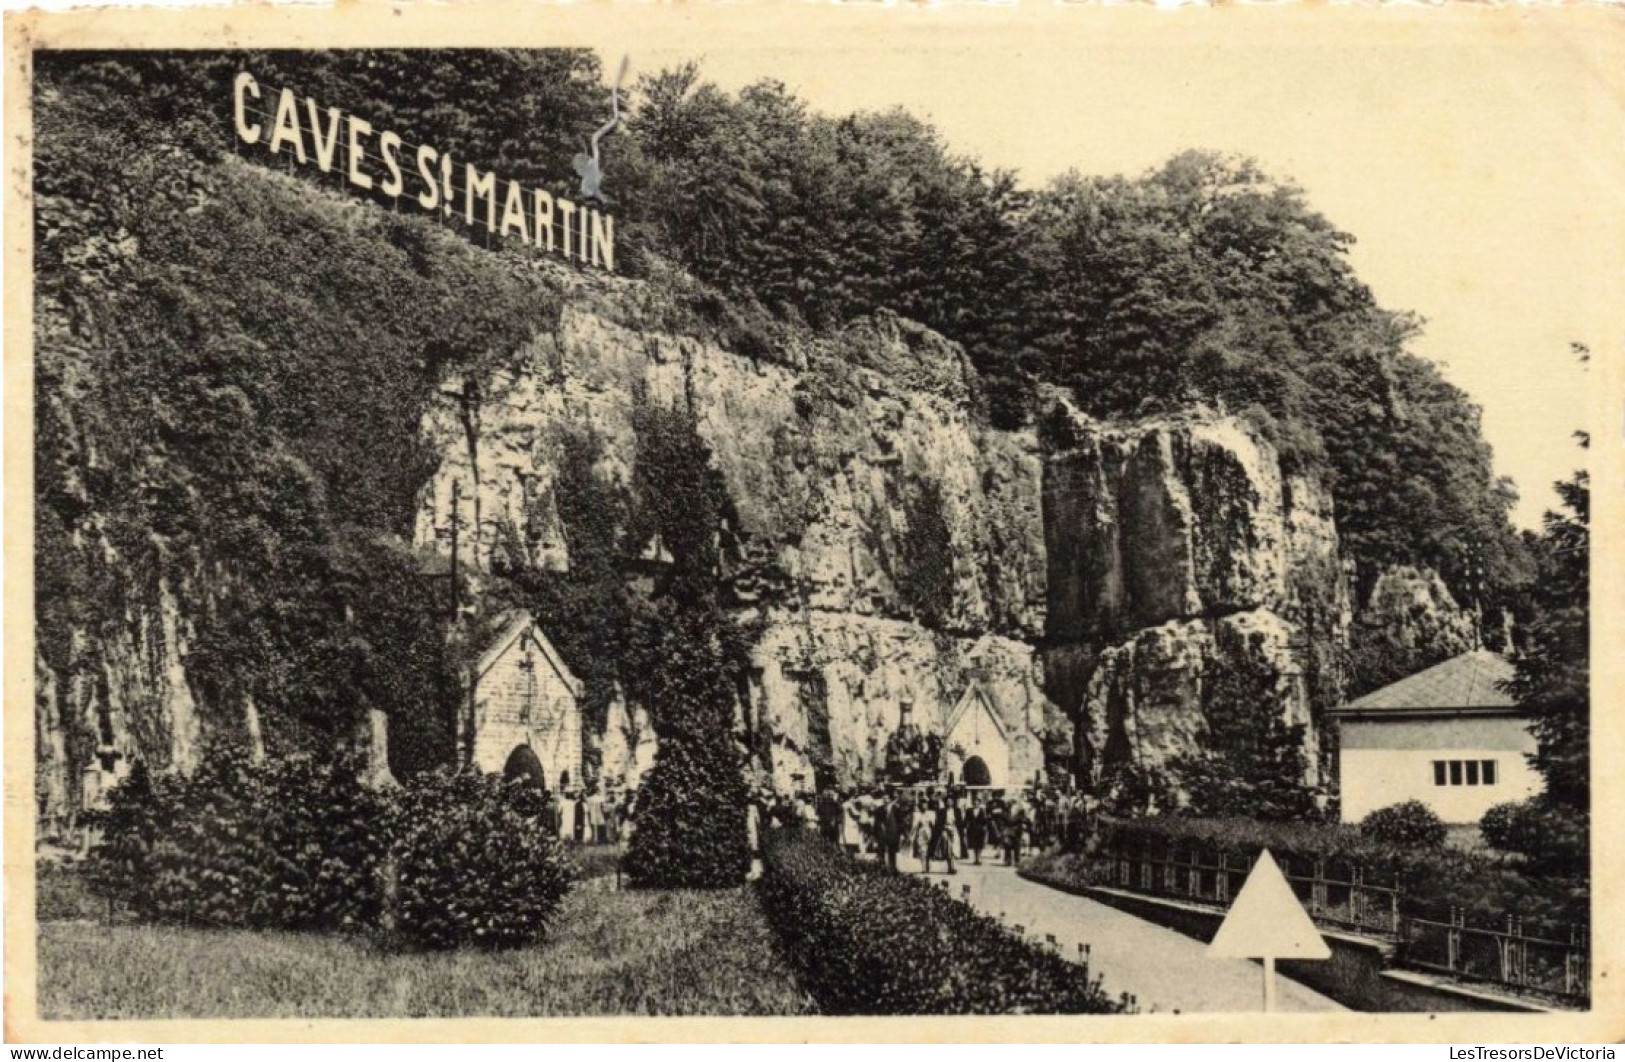 LUXEMBOURG - REMICH - Caves St Martin - Carte Postale Ancienne - Remich